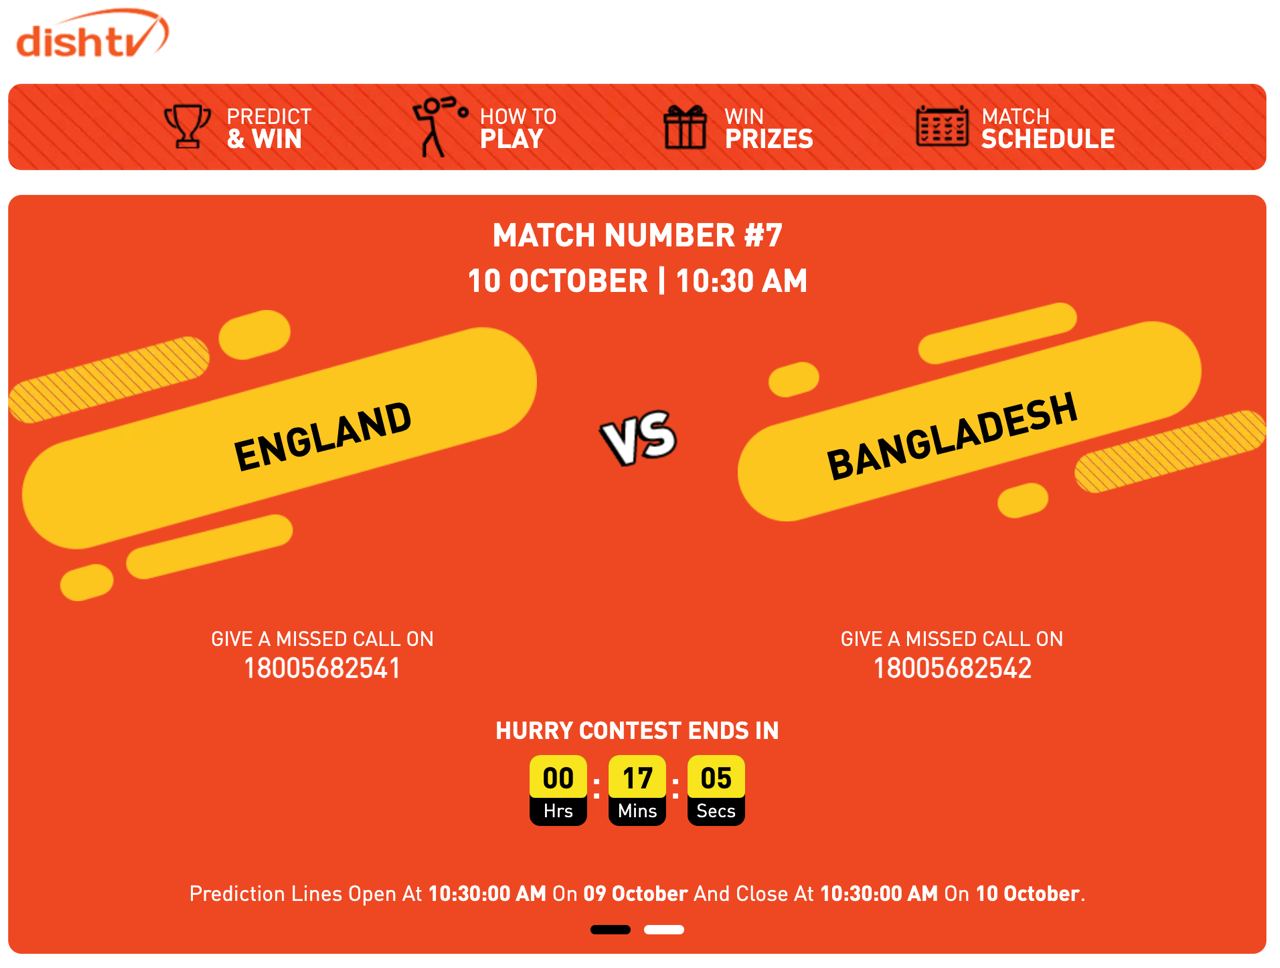 DishTV World Cup Predict & Win Contest - How to Play & Win